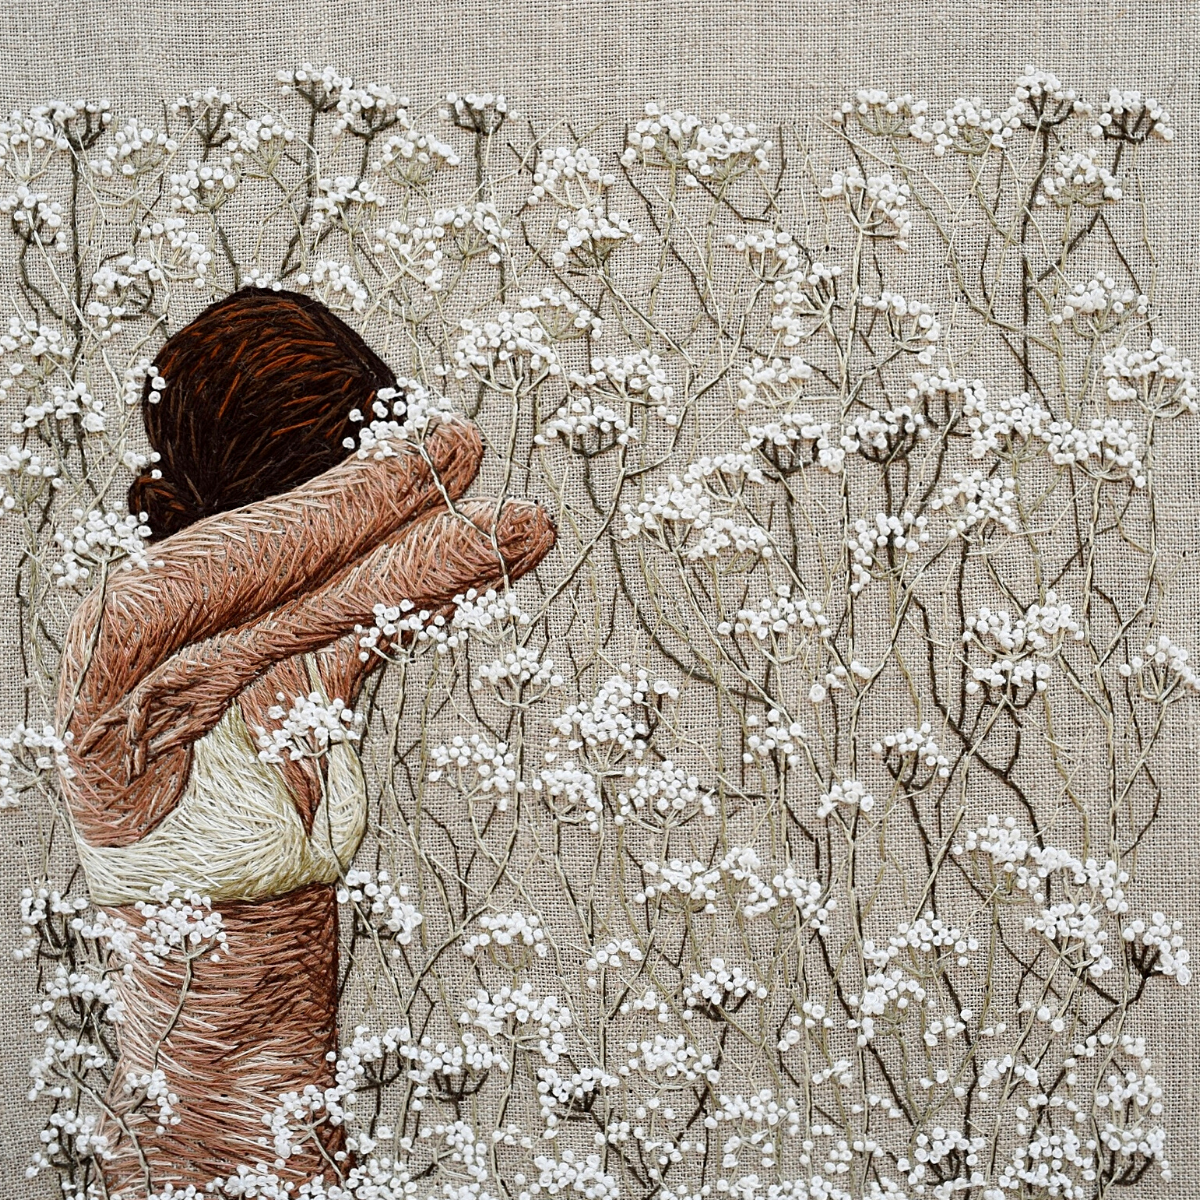 the-inspiration-behind-michelle-kingdoms-surreal-embroidered-artwork-featured